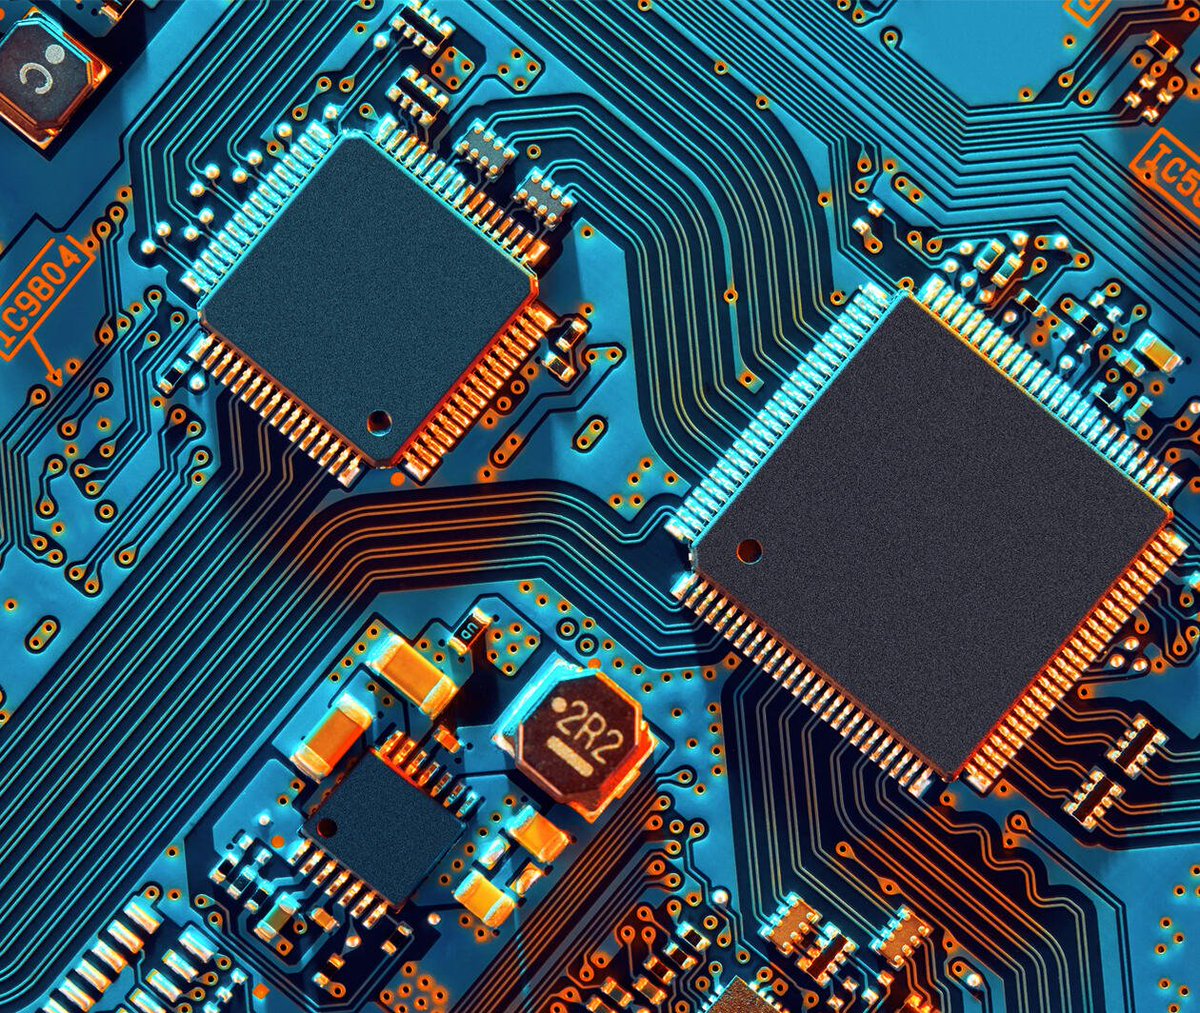 Are you considering studying engineering at university and want to find out more about Electronics? Our free online course, An Introduction to Electronics, gives you an opportunity to explore real world Electronic systems and their components bit.ly/3dMgvzR #TEWeek22